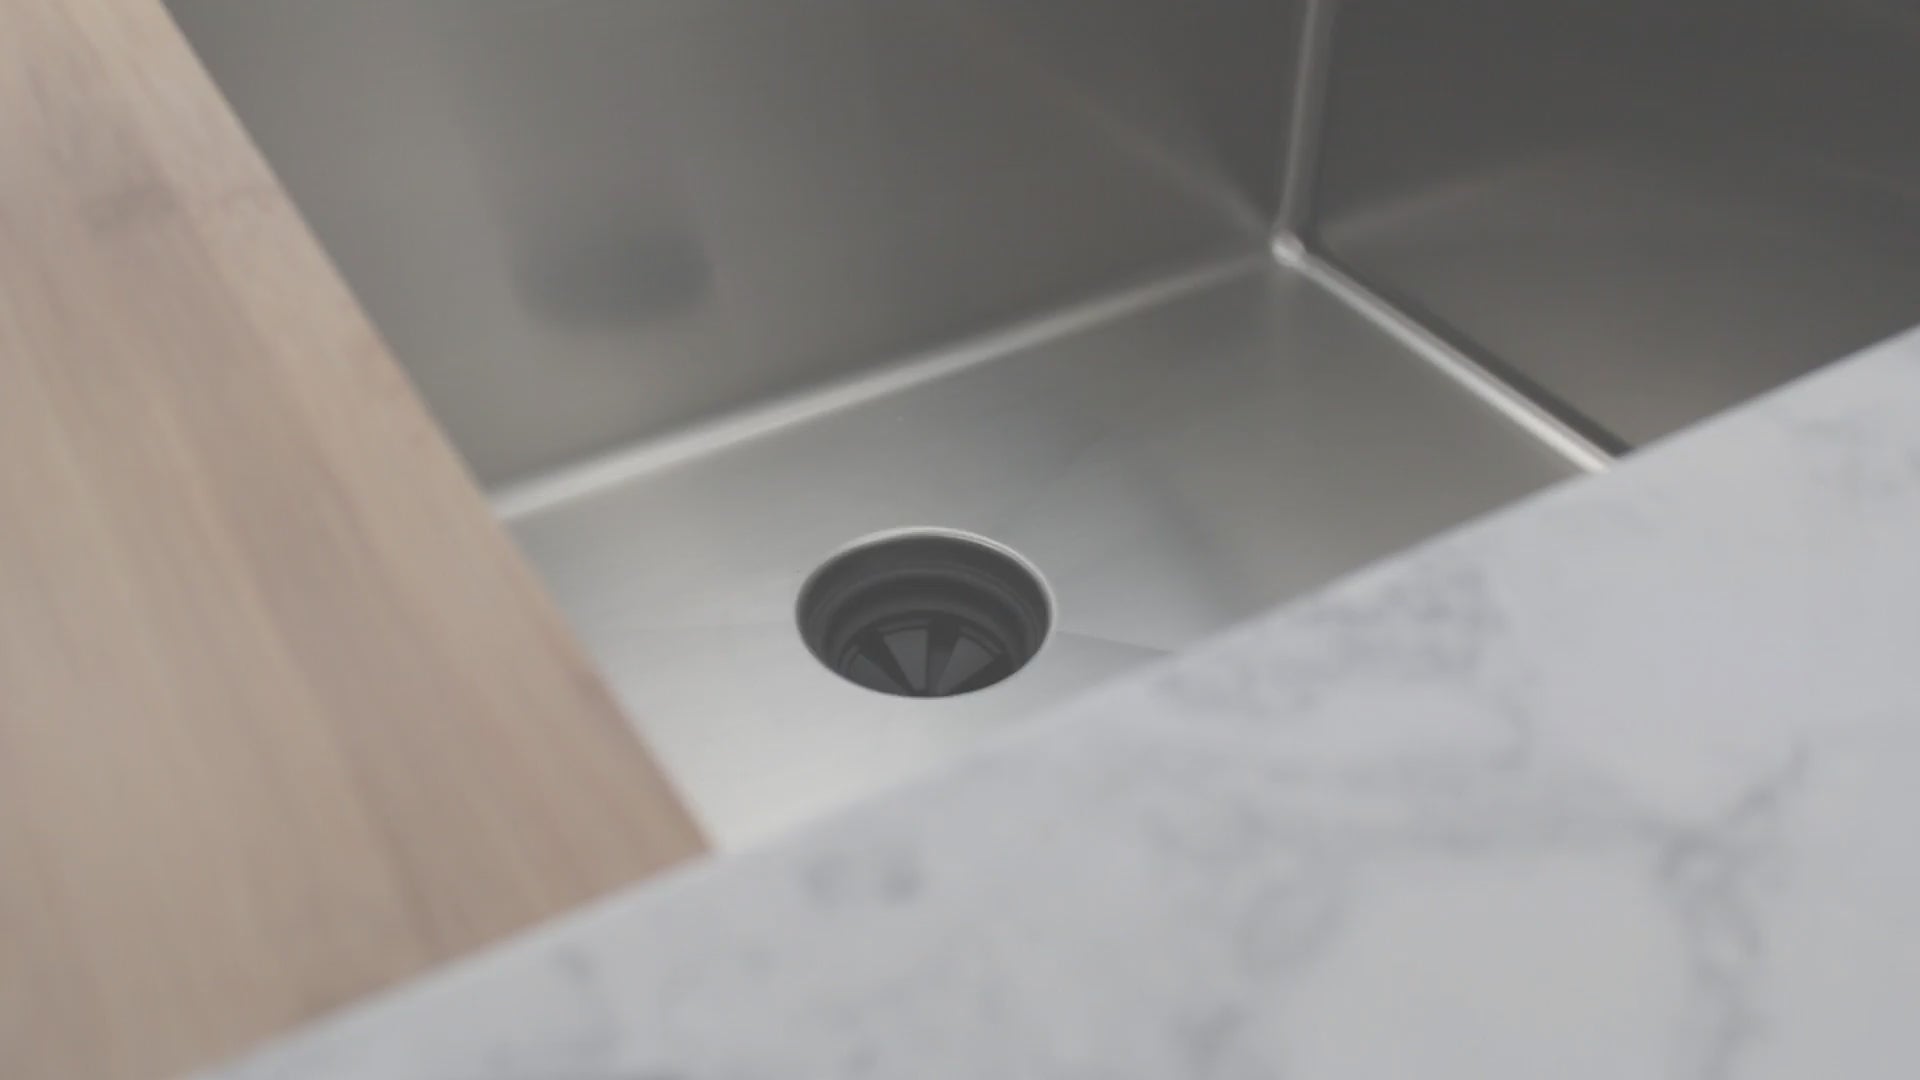 Loop video explaining how Create Good Sinks new design eliminates germs and bacteria in the kitchen sink